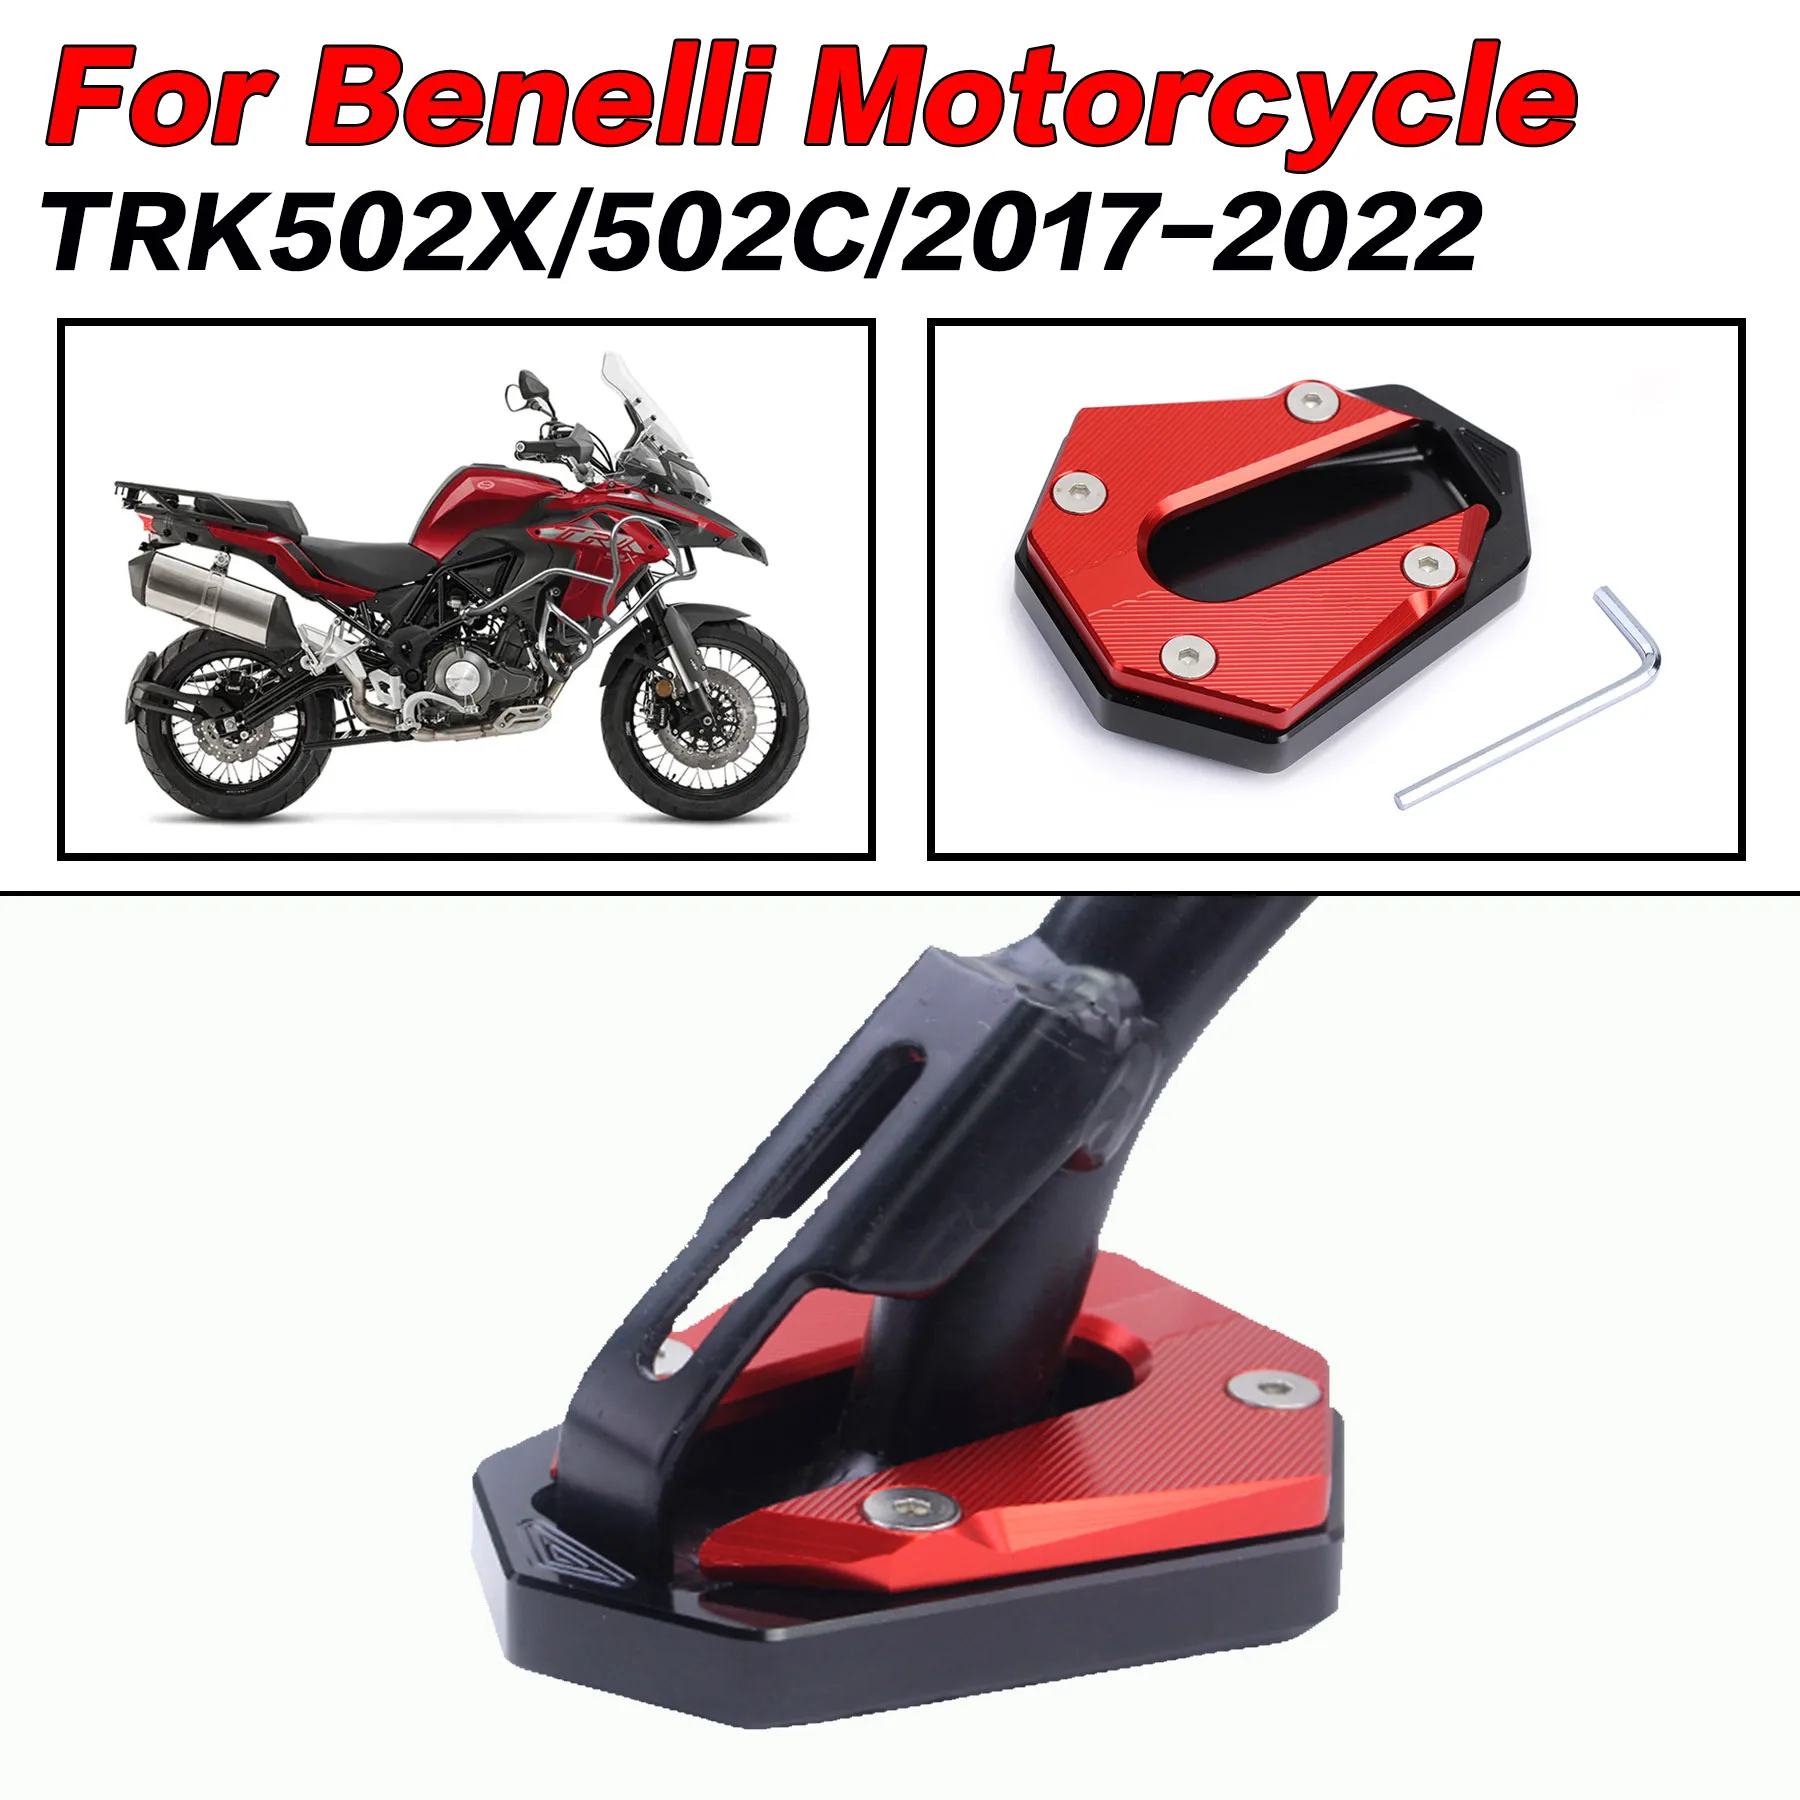 

For Benelli TRK 502X TRK 502 X TRK502X 2017-2022 2021 2019 2020 Motorcycle Accessories Kickstand Side Stand Enlarger Pad Plate